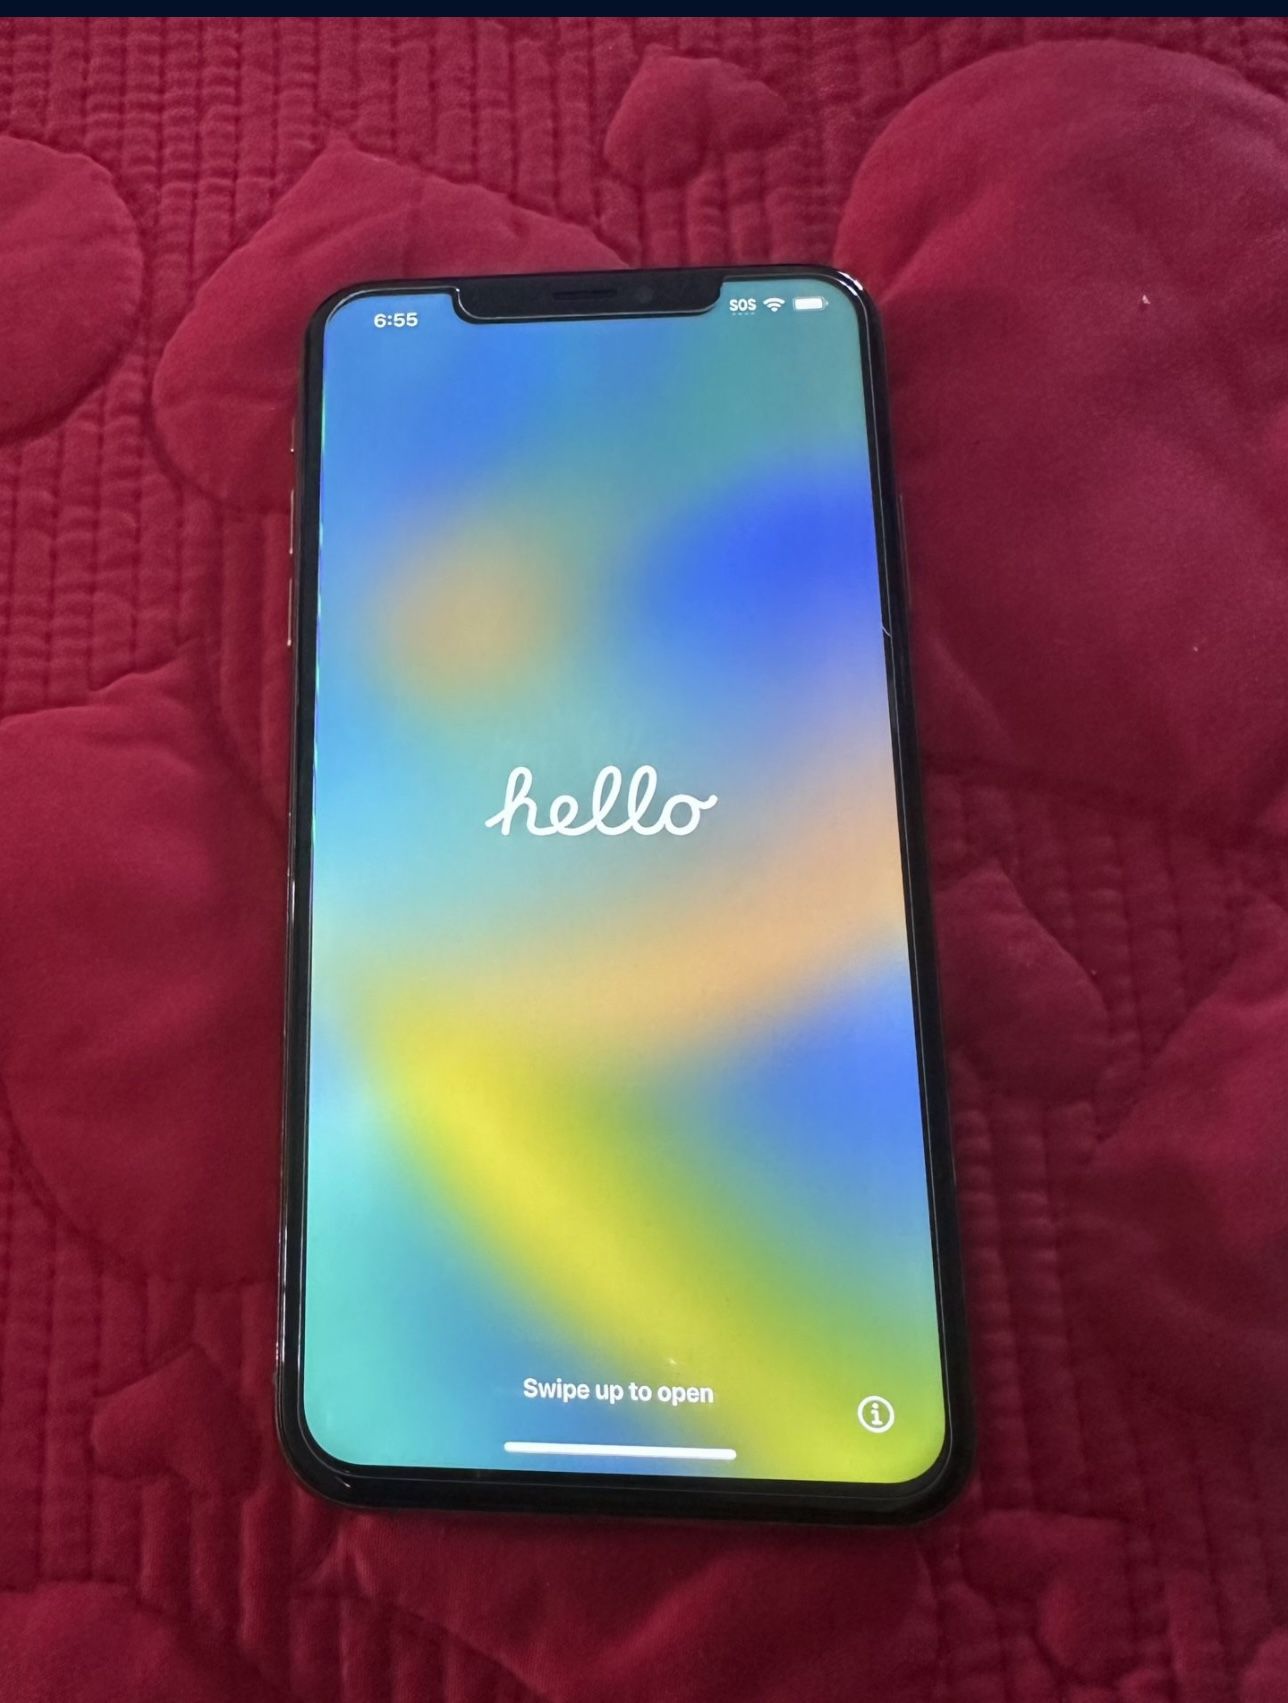 Iphone XS Max 244gb Locked with AT&T